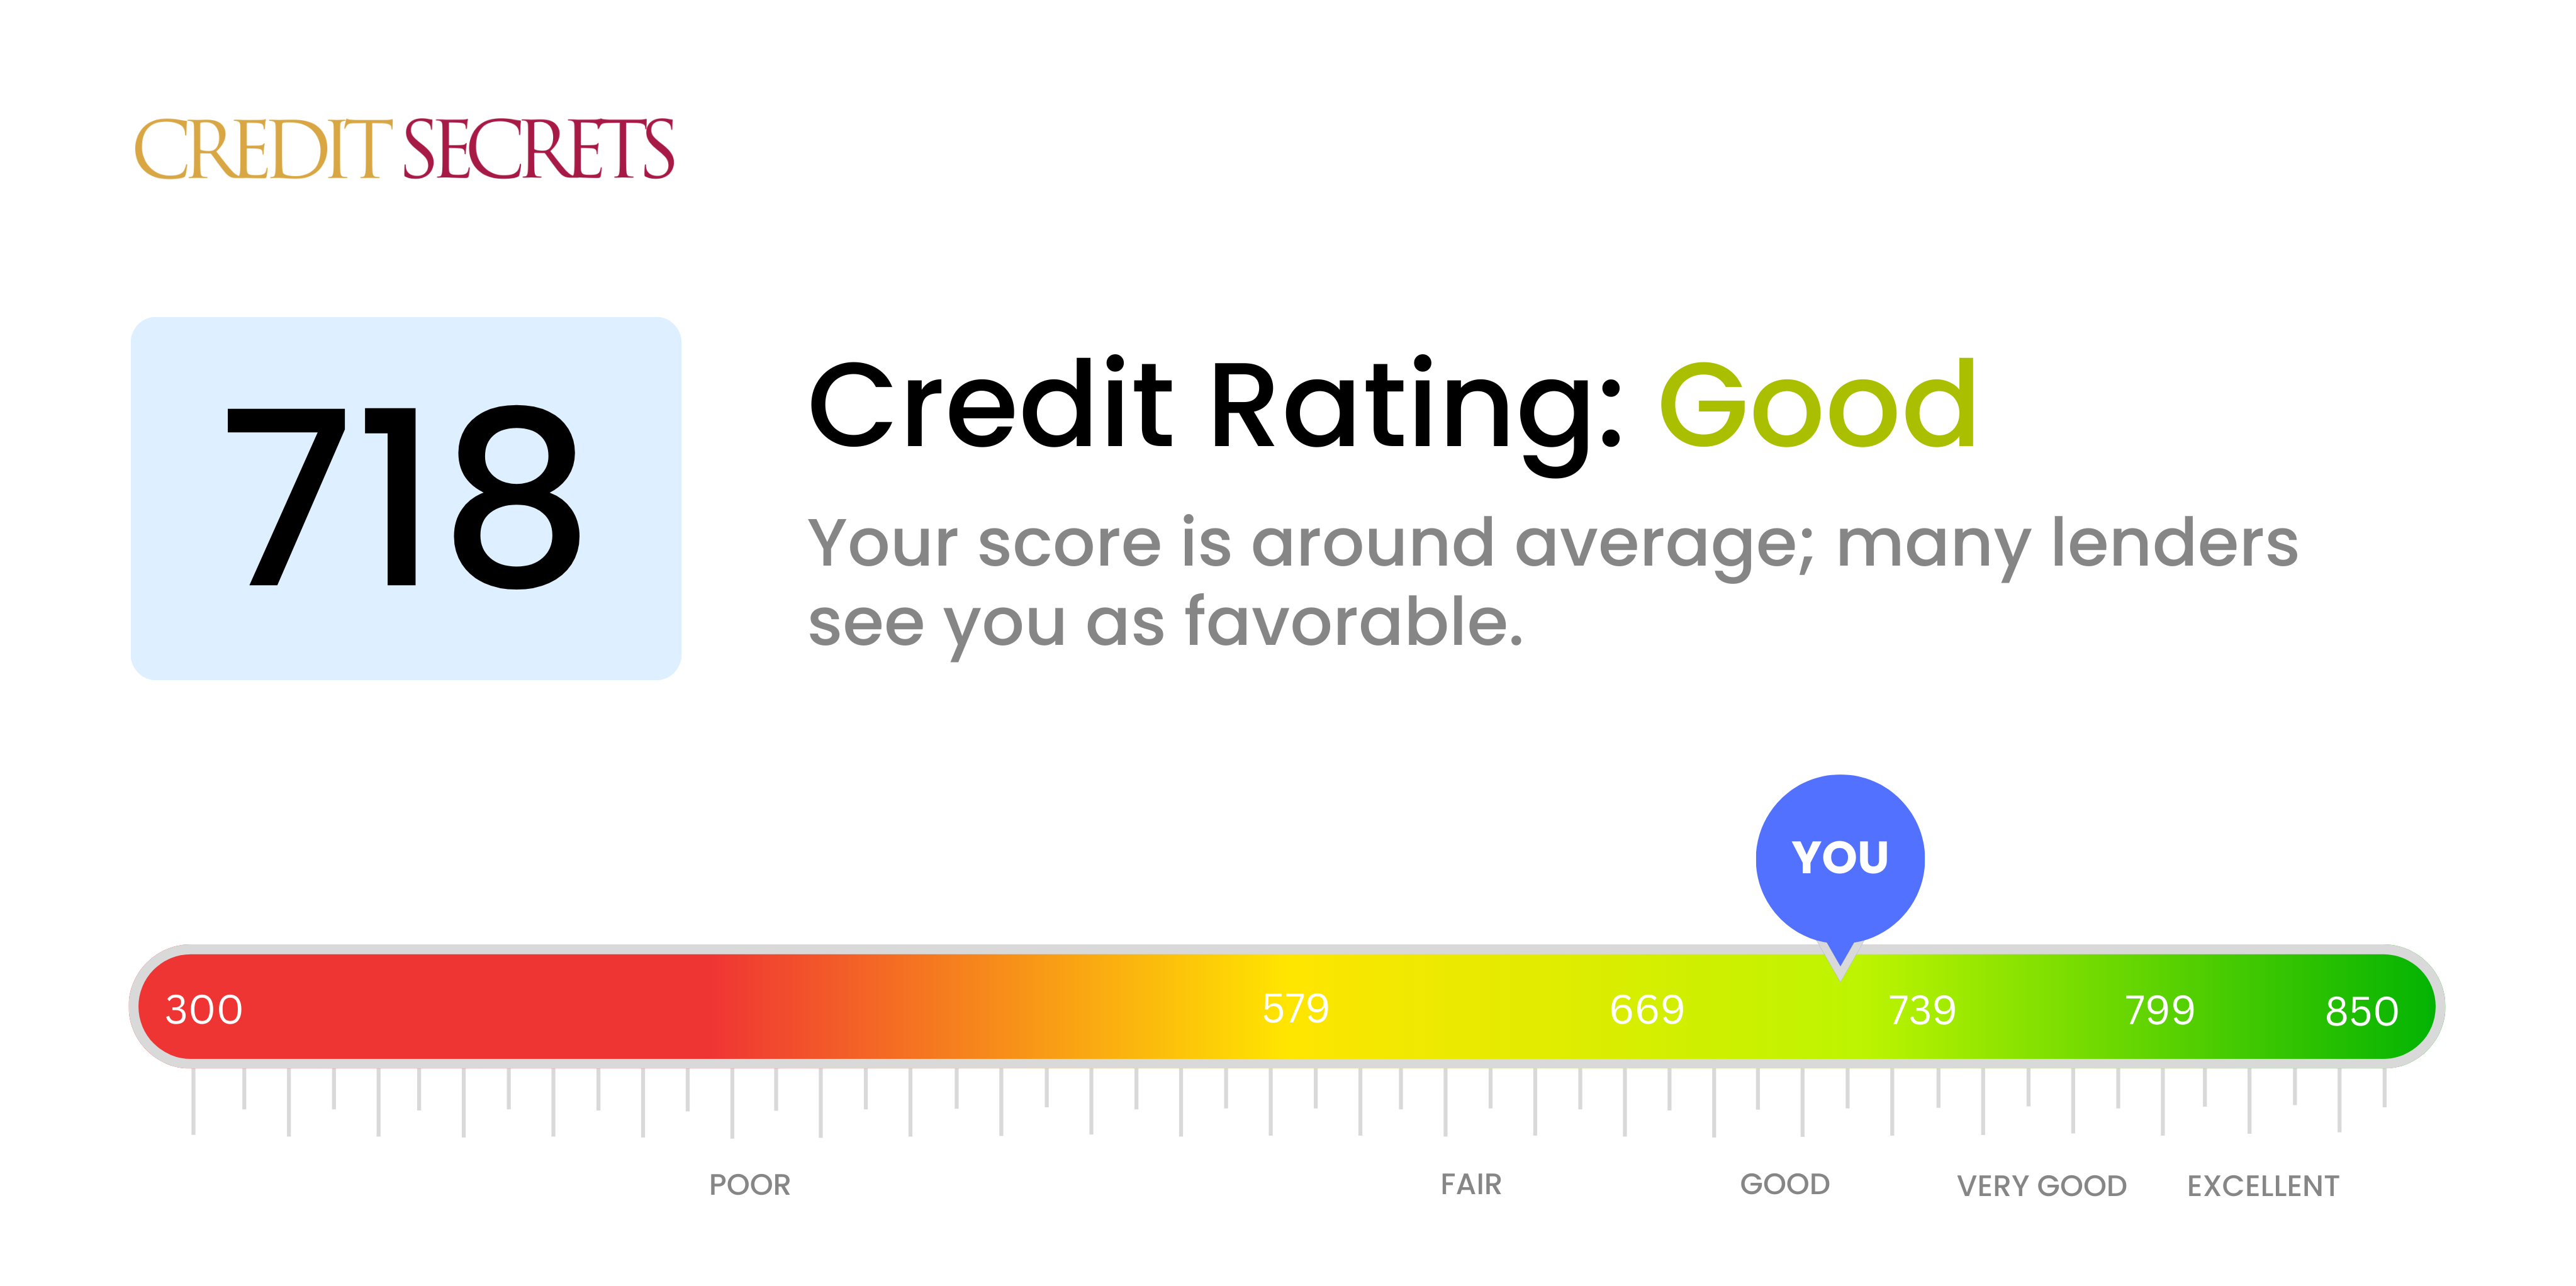 Is 718 a good credit score?